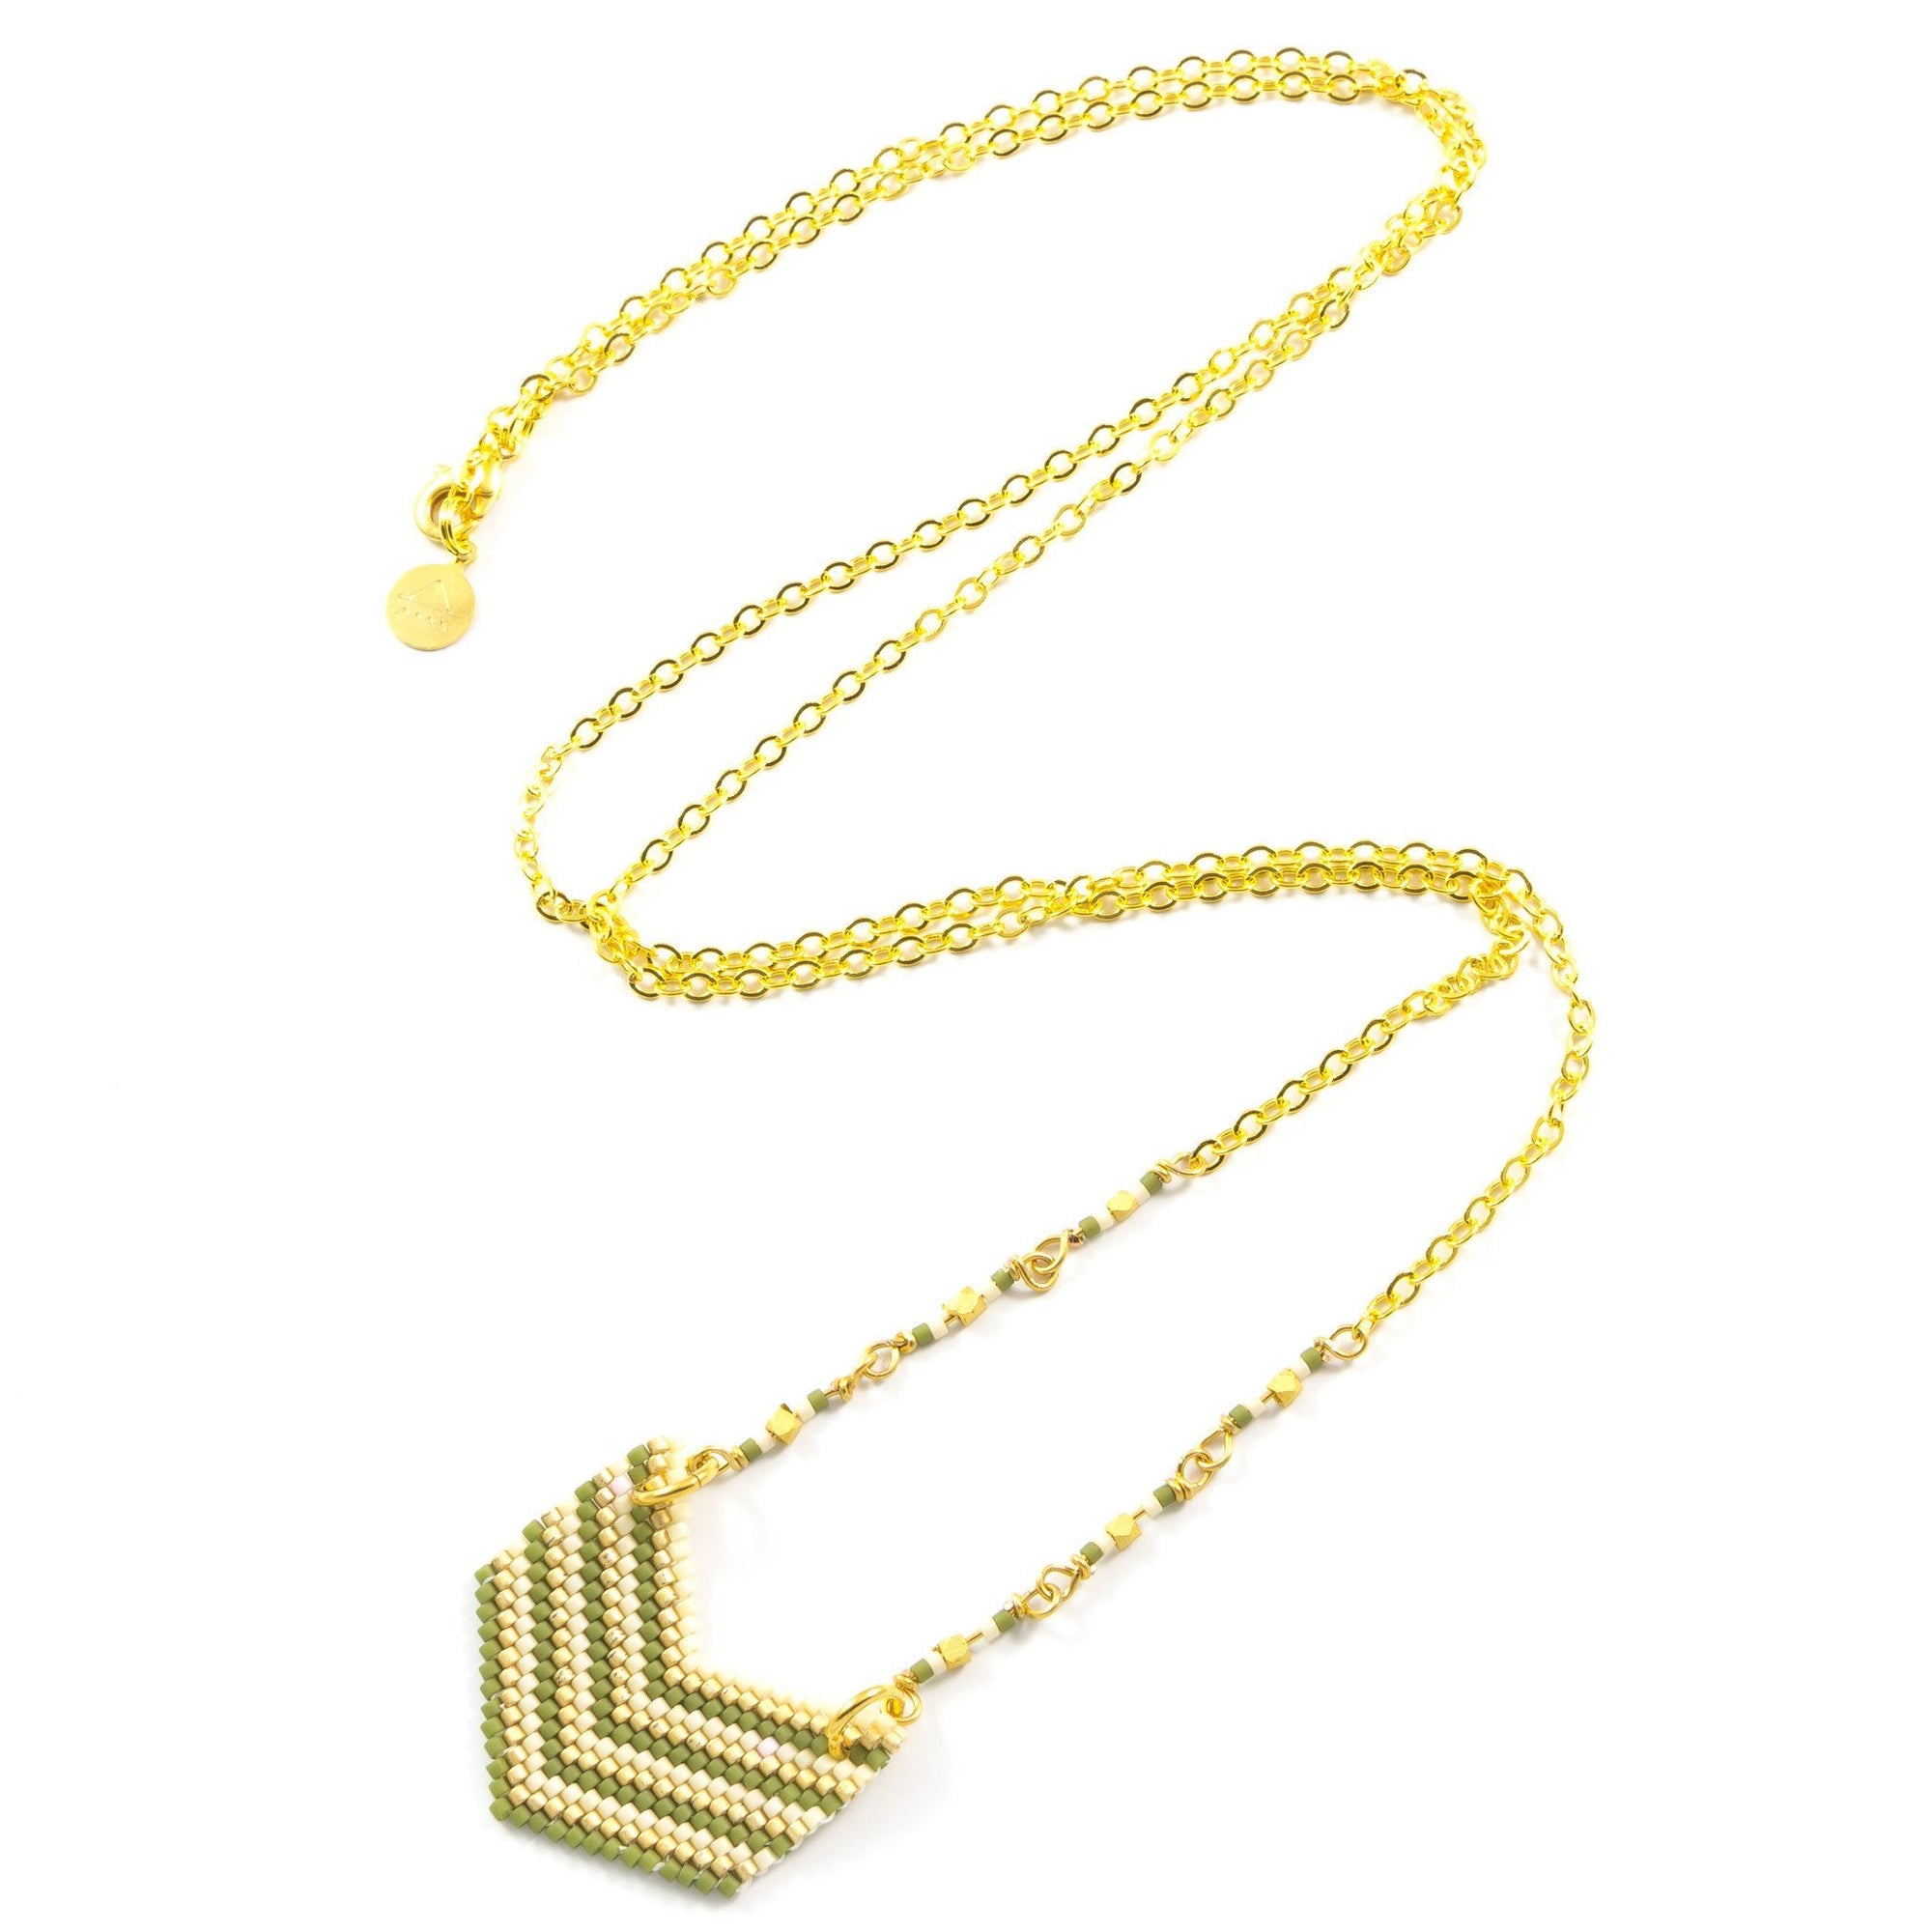 Olive Green Woven Chevron Necklace